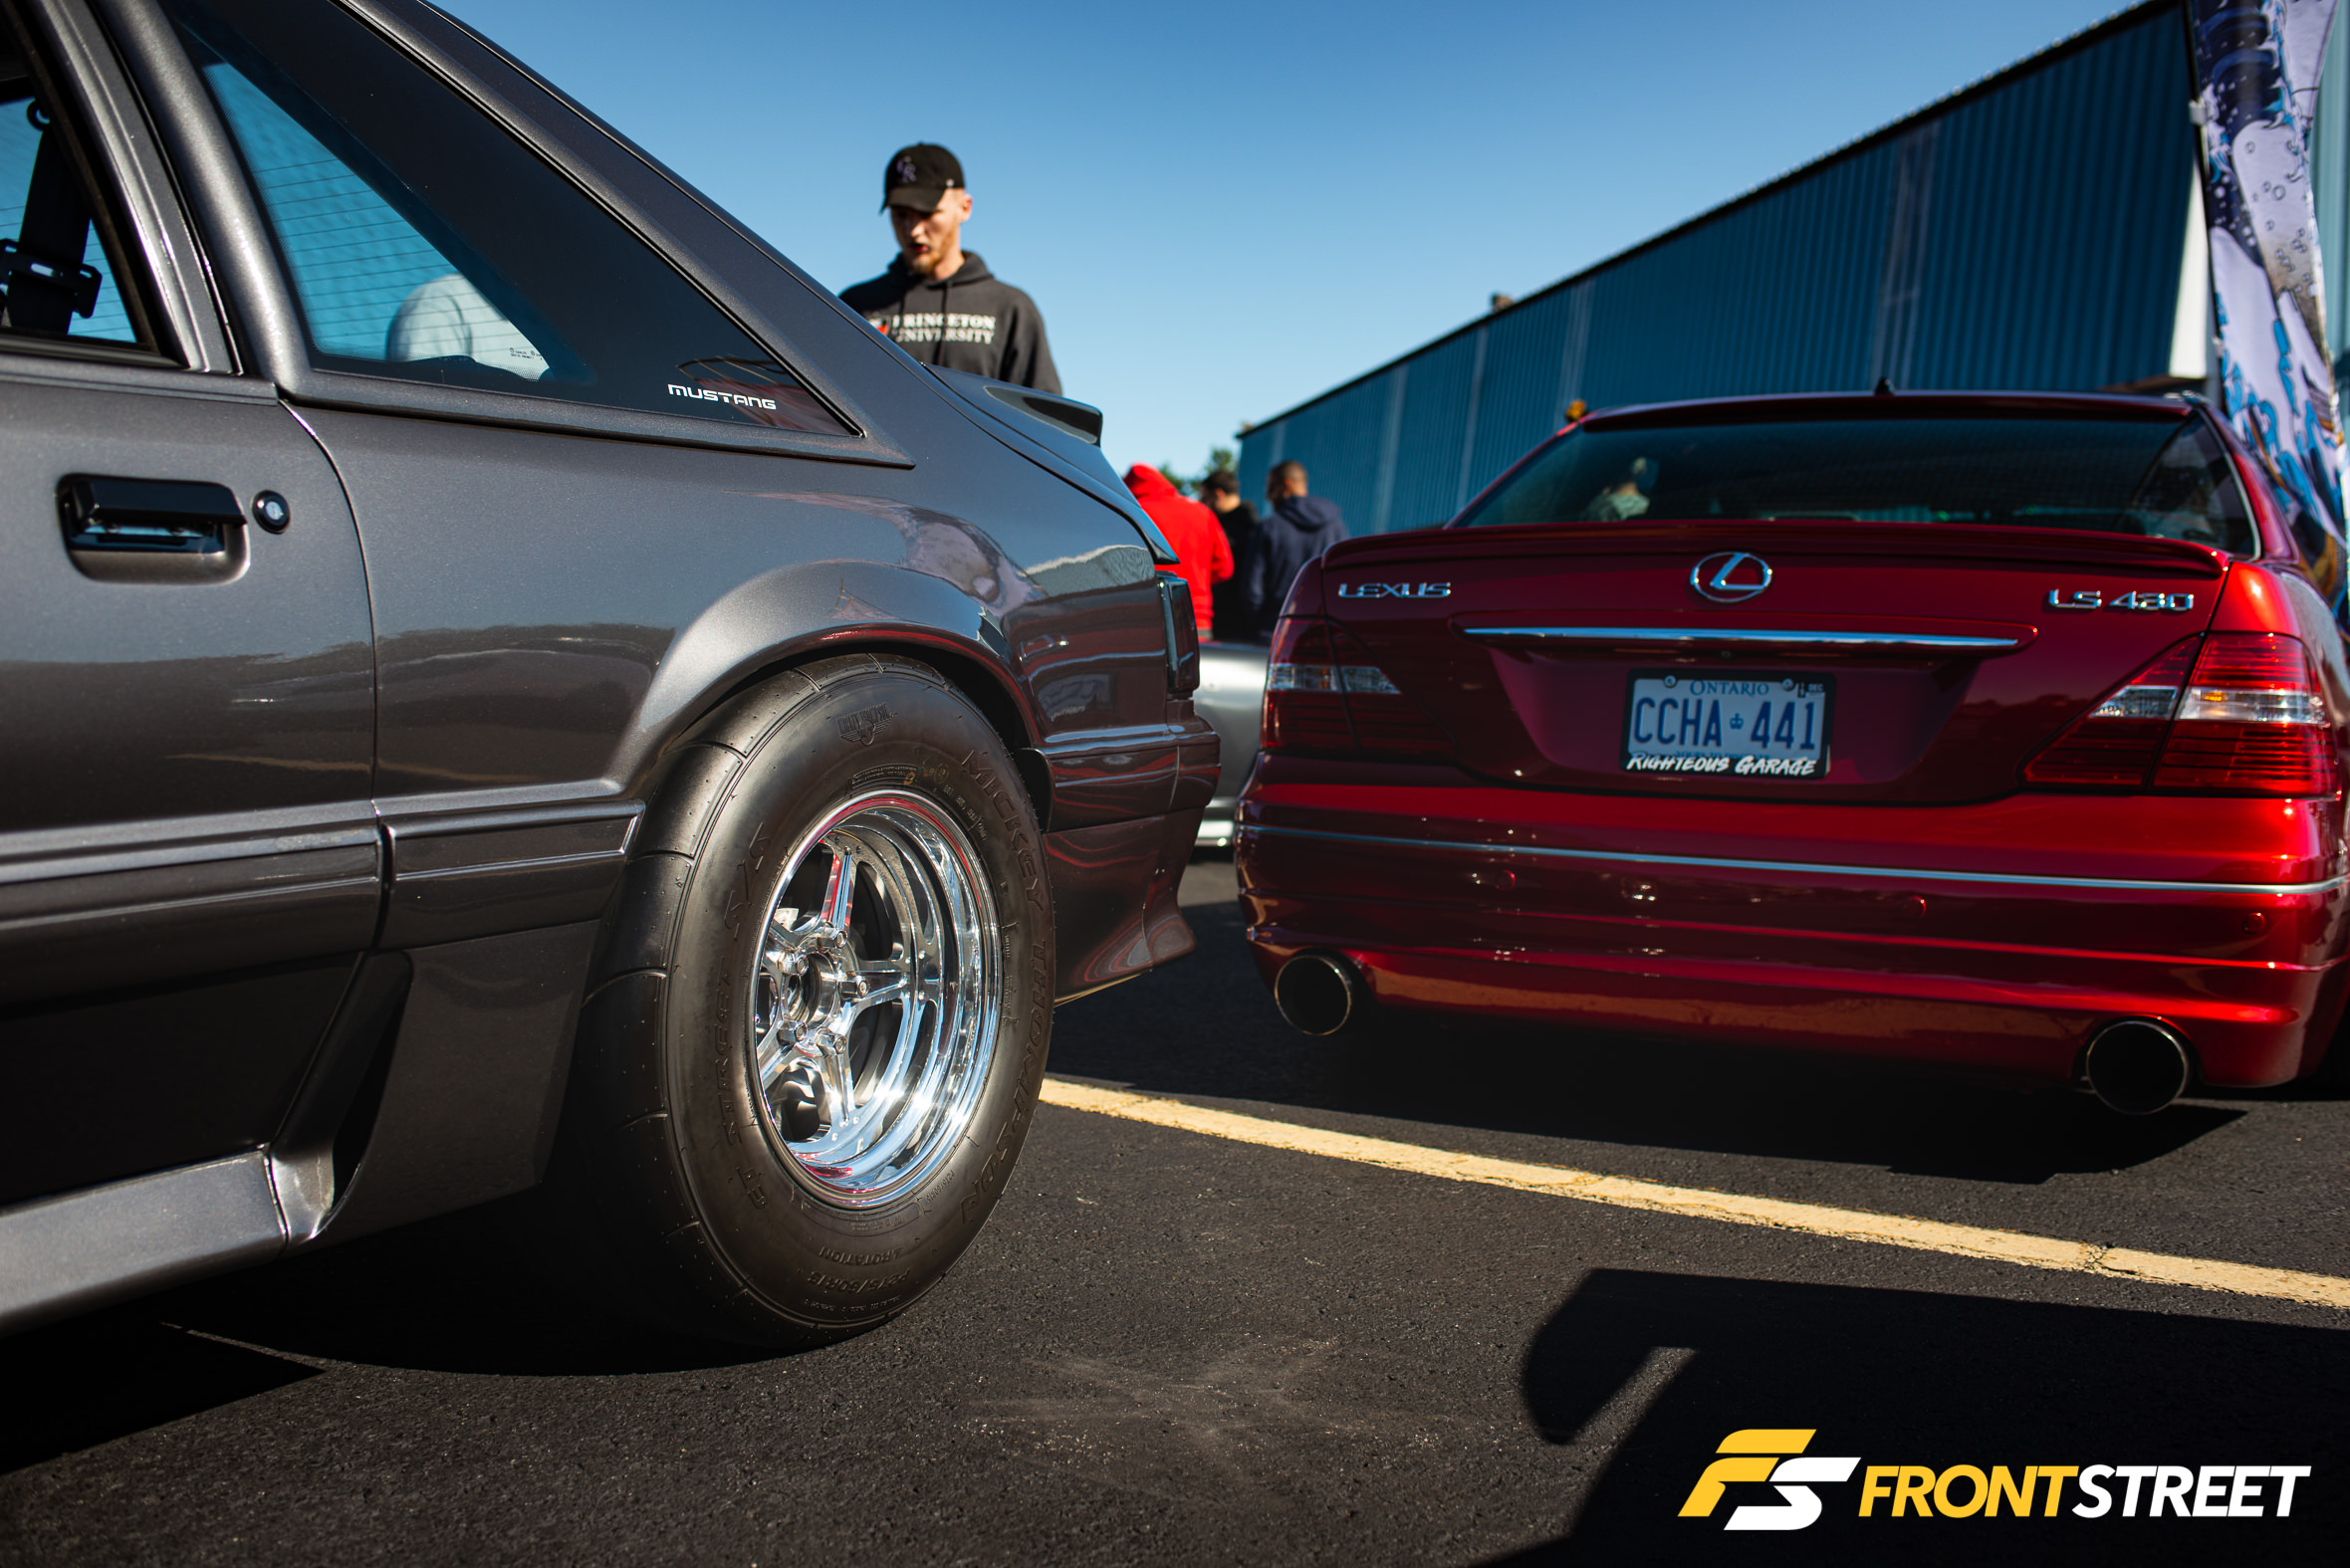 Canibeat’s First Class Fitment 2019: The Final Show